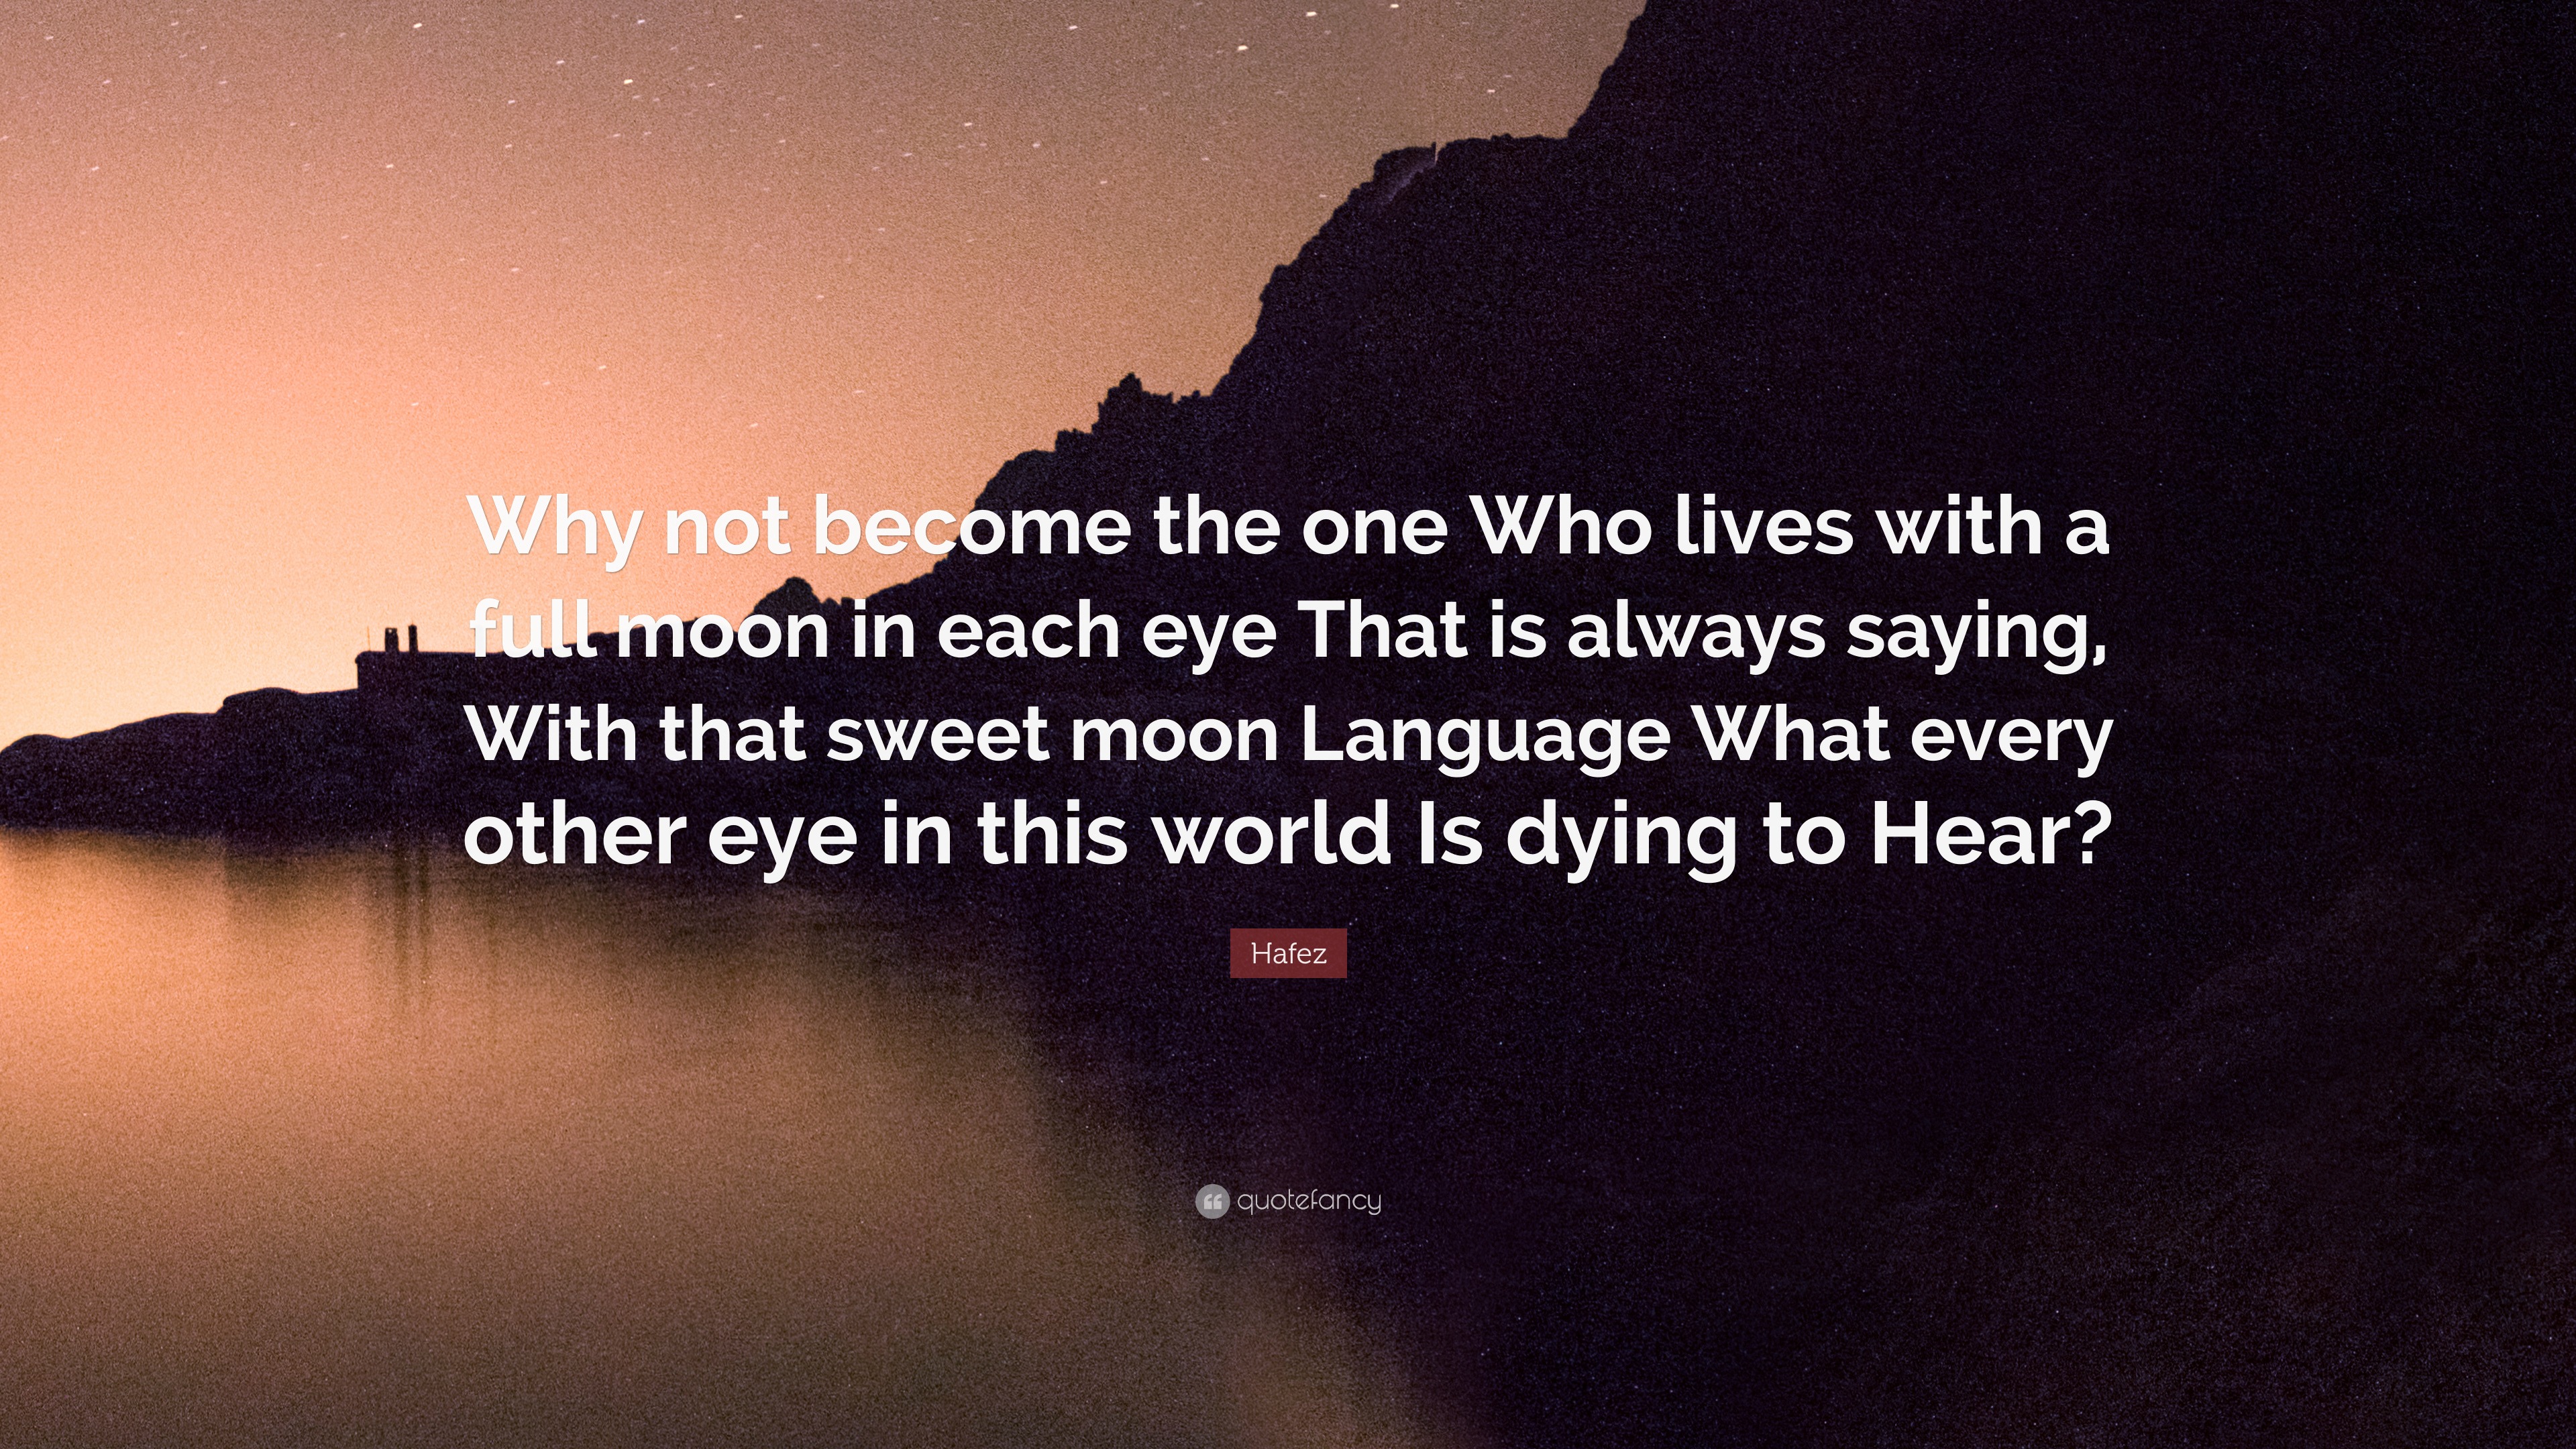 Hafez Quote: "Why not become the one Who lives with a full ...